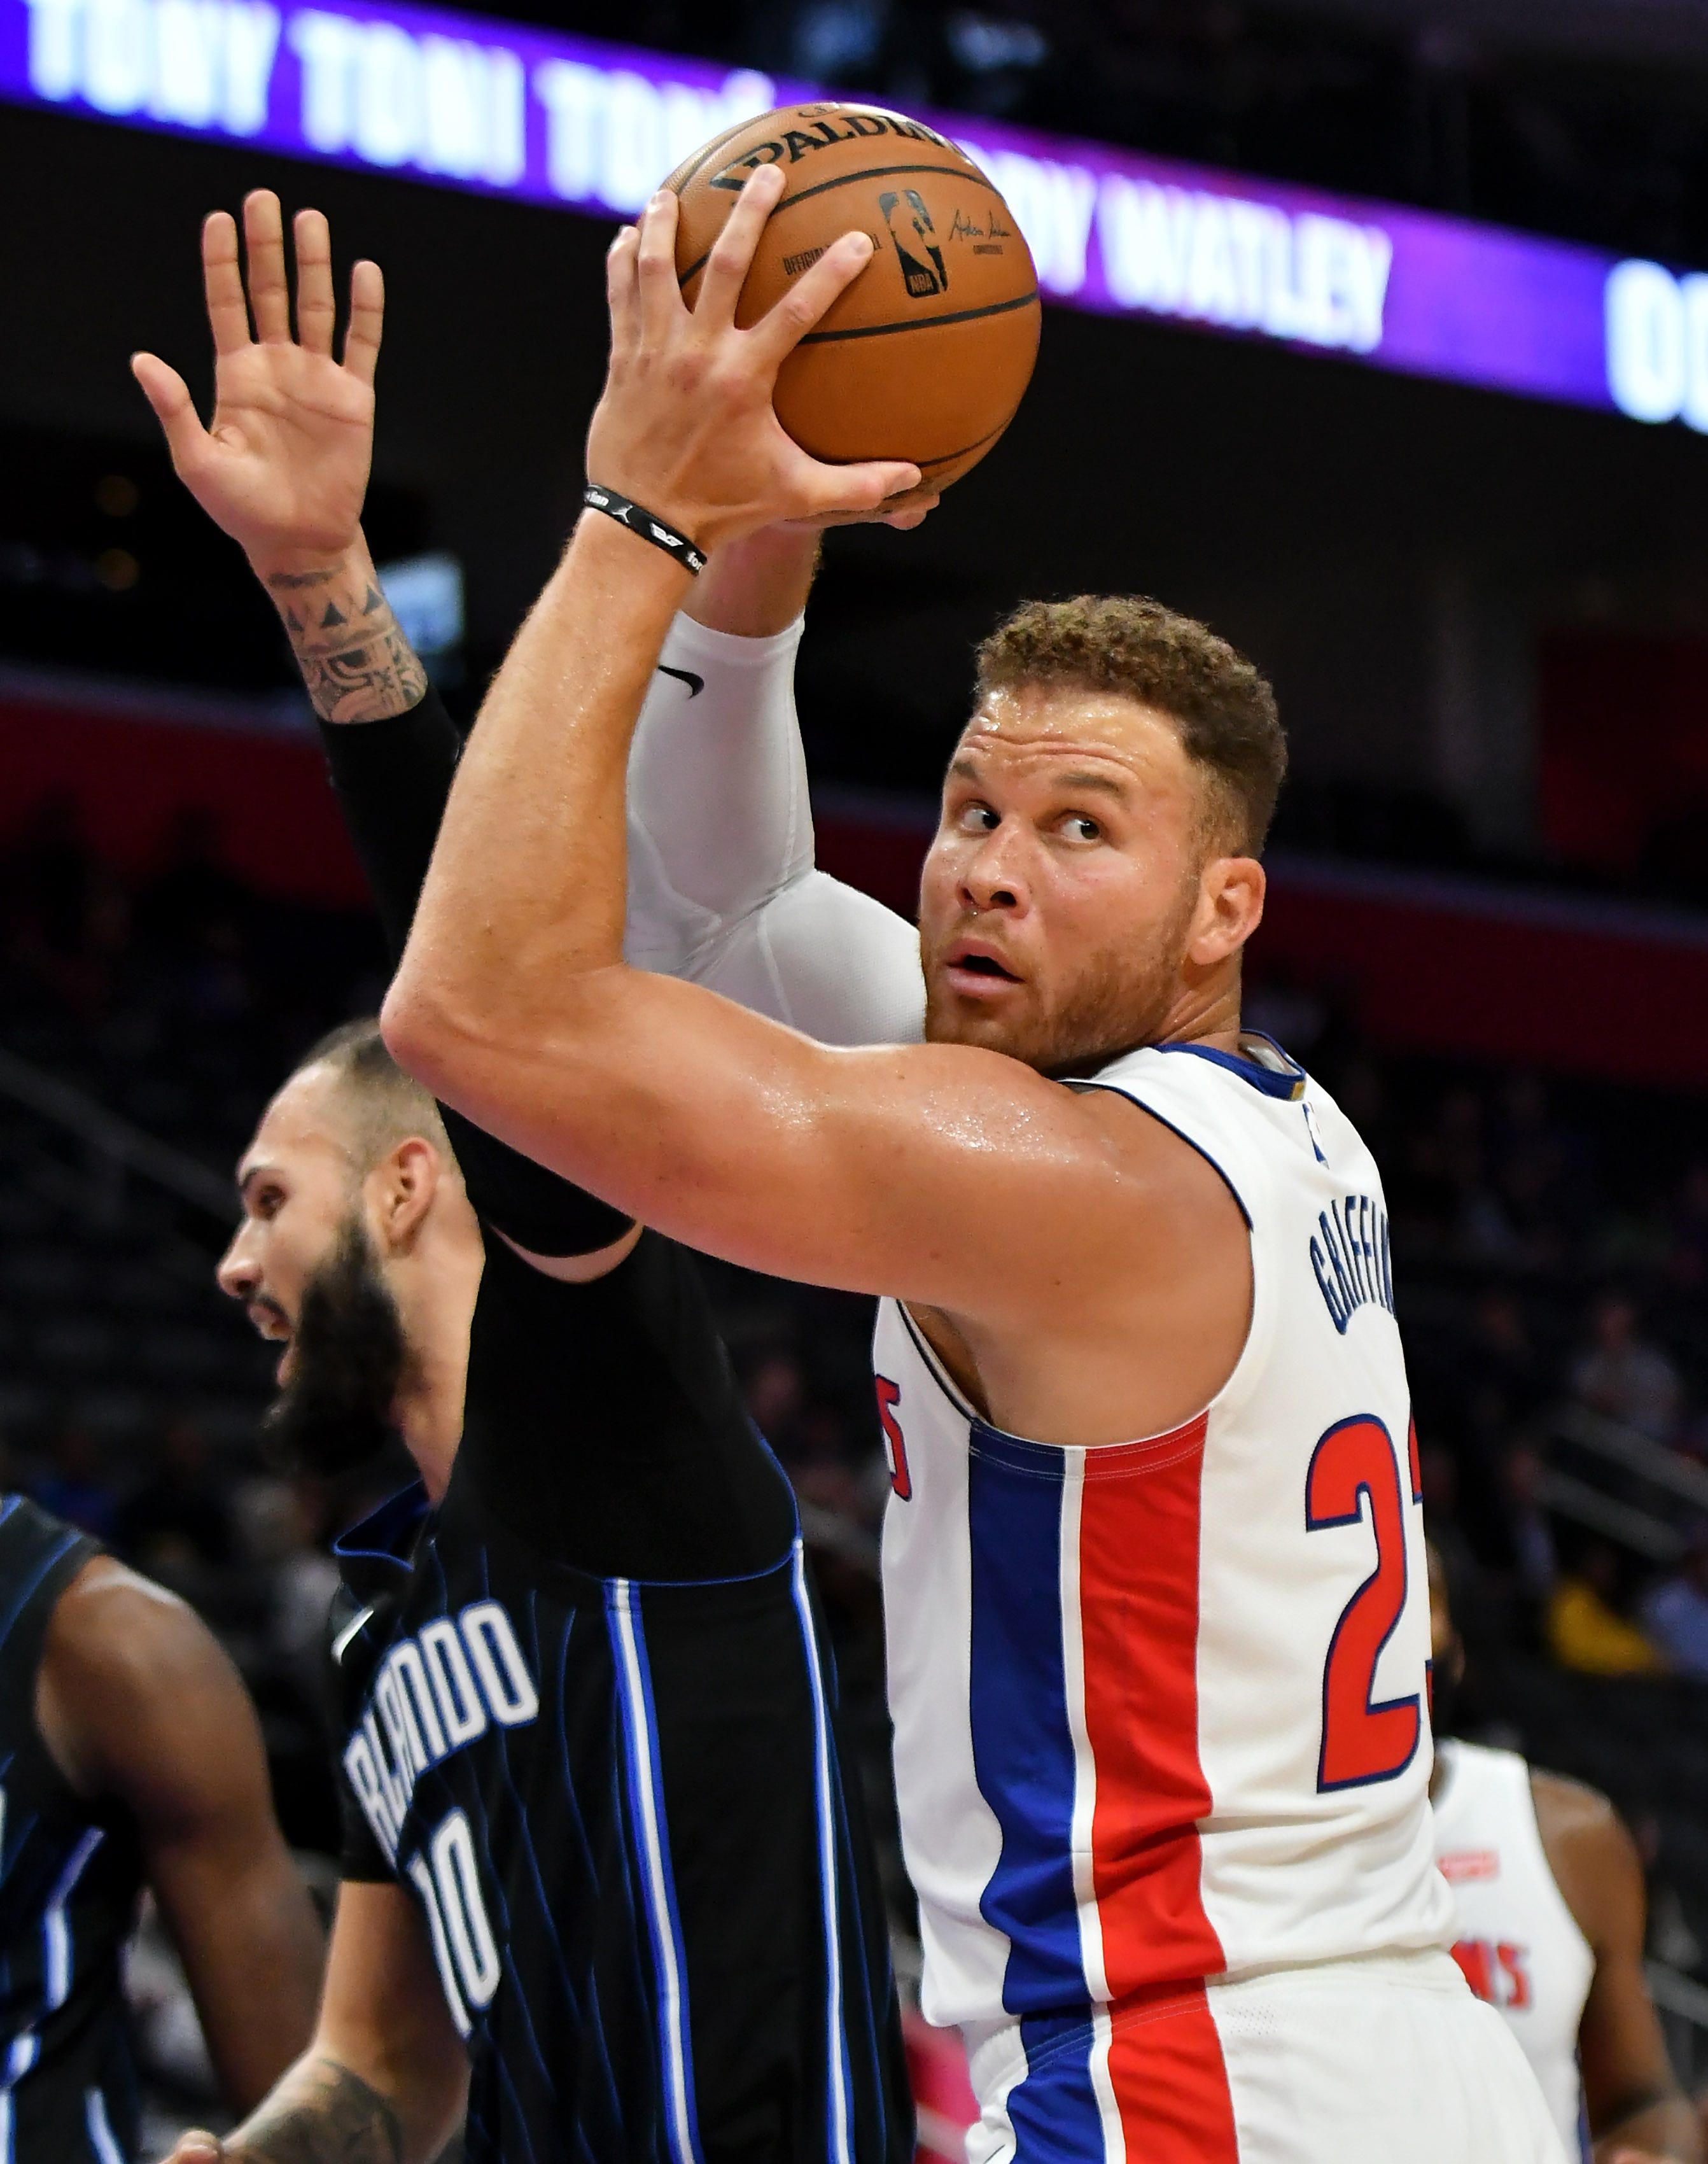 Blake Griffin: Age: 30. Ht: 6-10. Wt: 250. 2018-19 stats: 24.5 pts, 7.5 rebs, 5.4 assts, 36% 3FG. Outlook: He had another All-NBA season and was dominant when he was healthy, in 75 games. Griffin could see more rest this season, but the versatile skill set still is impressive. They ’ ll also dial down his usage, hoping to keep him fresher for late-game situations.